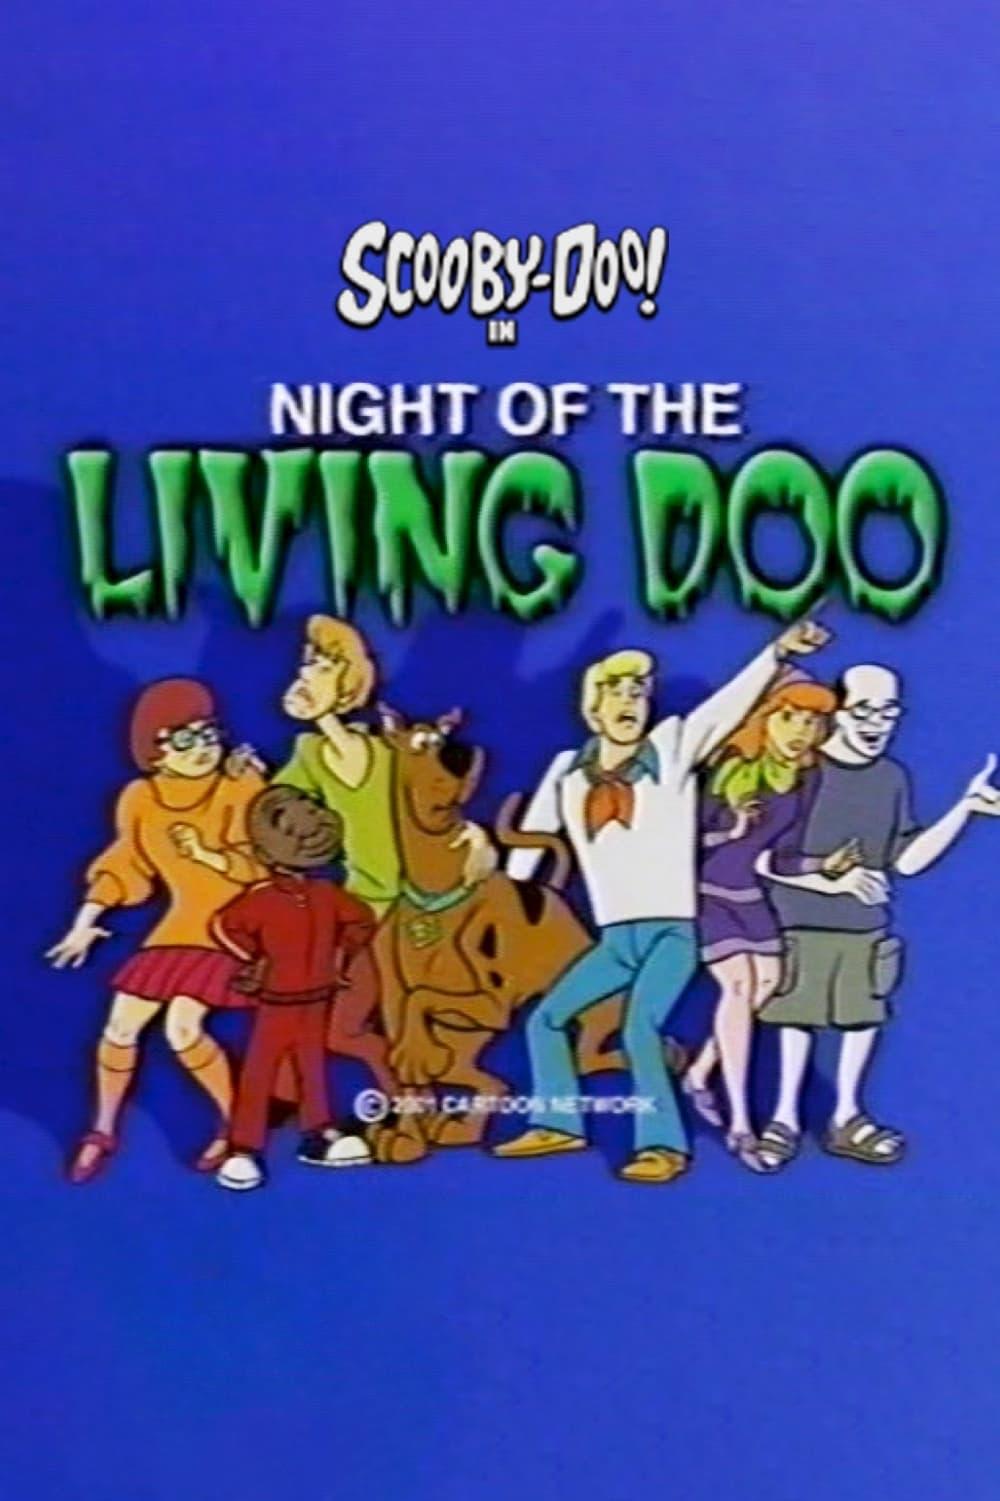 Night of the Living Doo poster